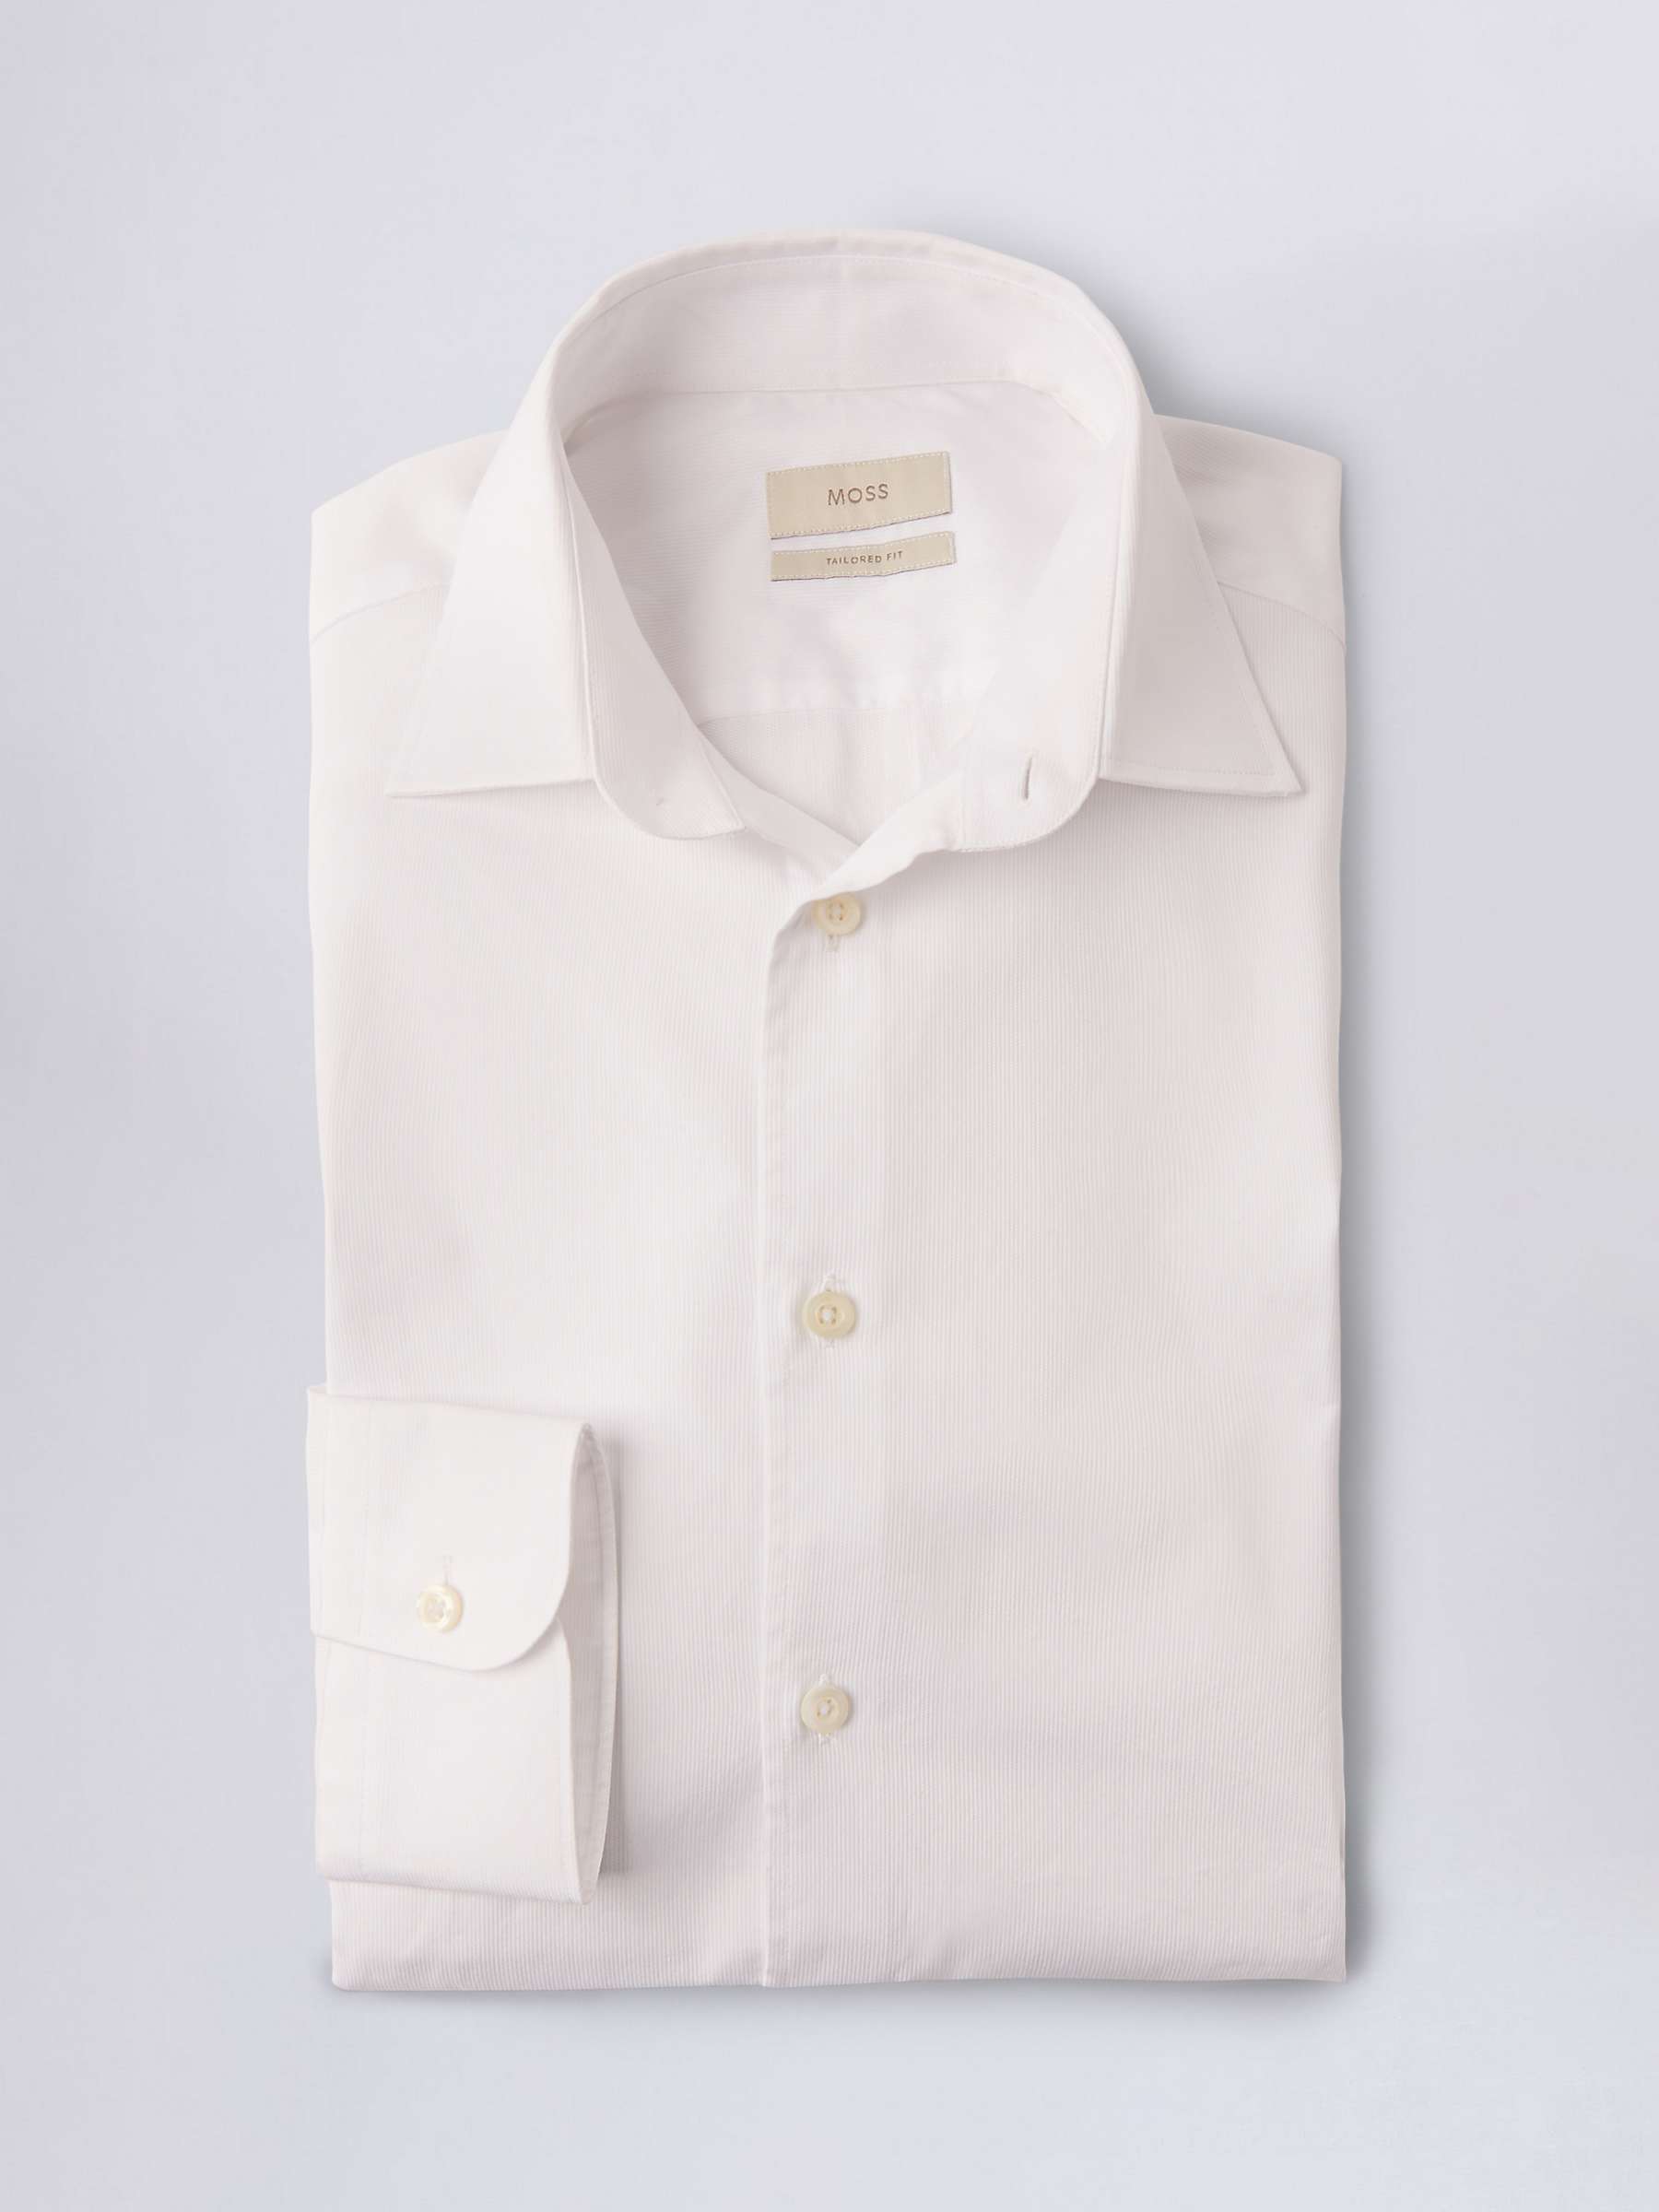 Buy Moss Tailored Fit Piquet Textured Shirt, White Online at johnlewis.com